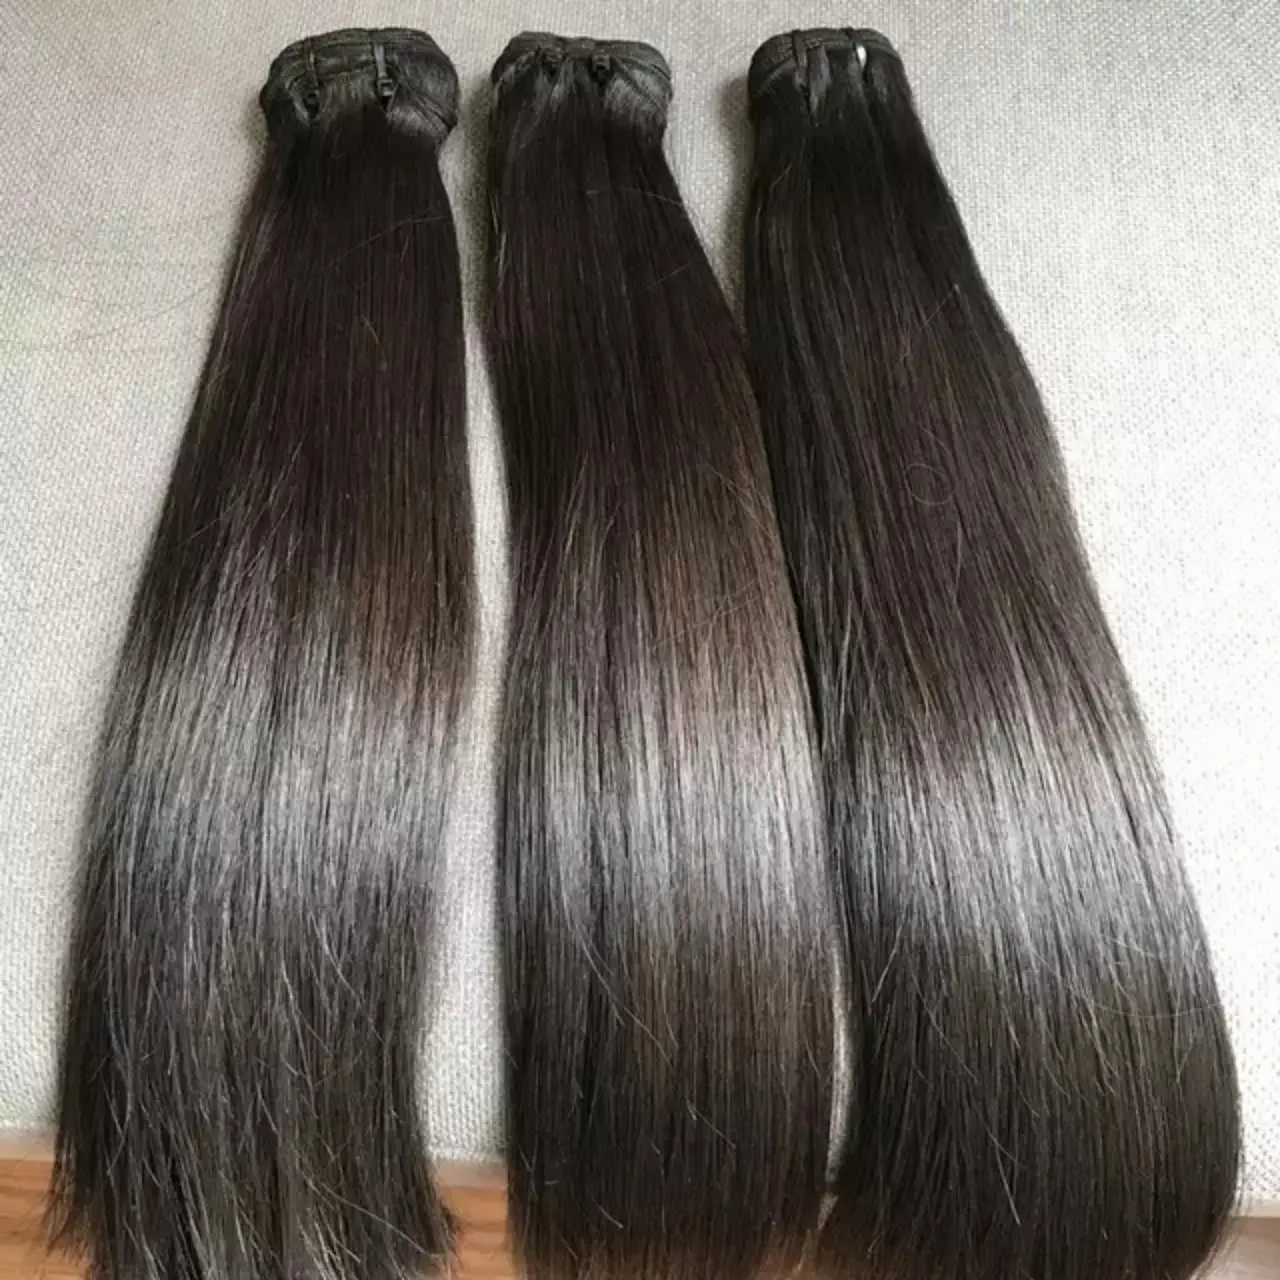 Hot Sell Double Drawn Bone Straight Hair Bundles Double Drawn Wholesale Vietnamese Human Long Hair Extensions 8-32 inches